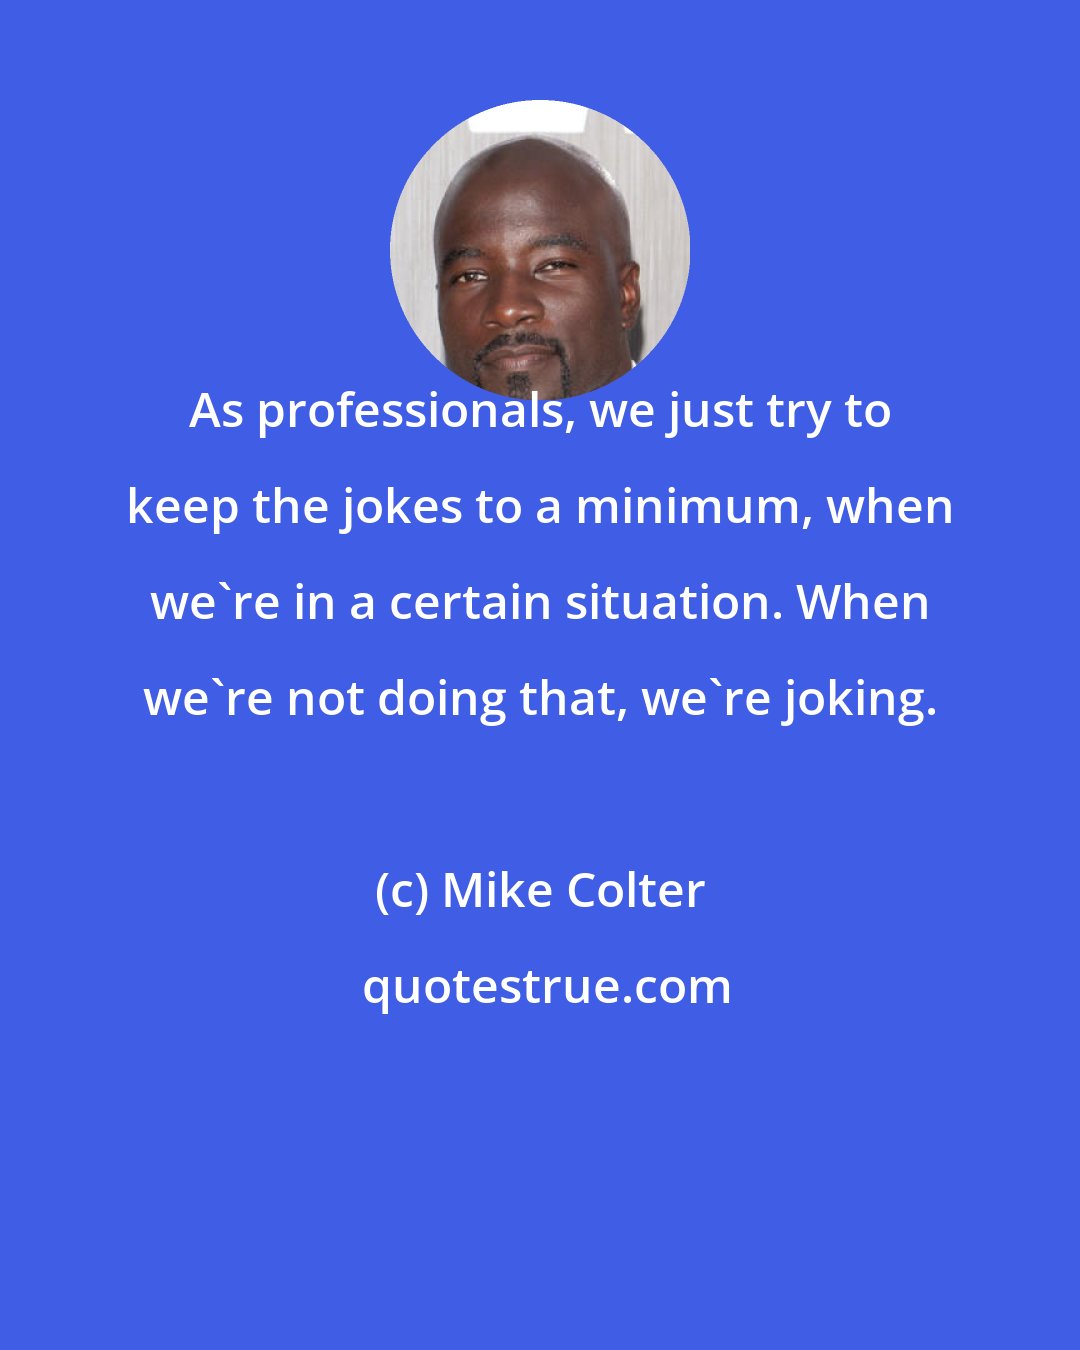 Mike Colter: As professionals, we just try to keep the jokes to a minimum, when we're in a certain situation. When we're not doing that, we're joking.